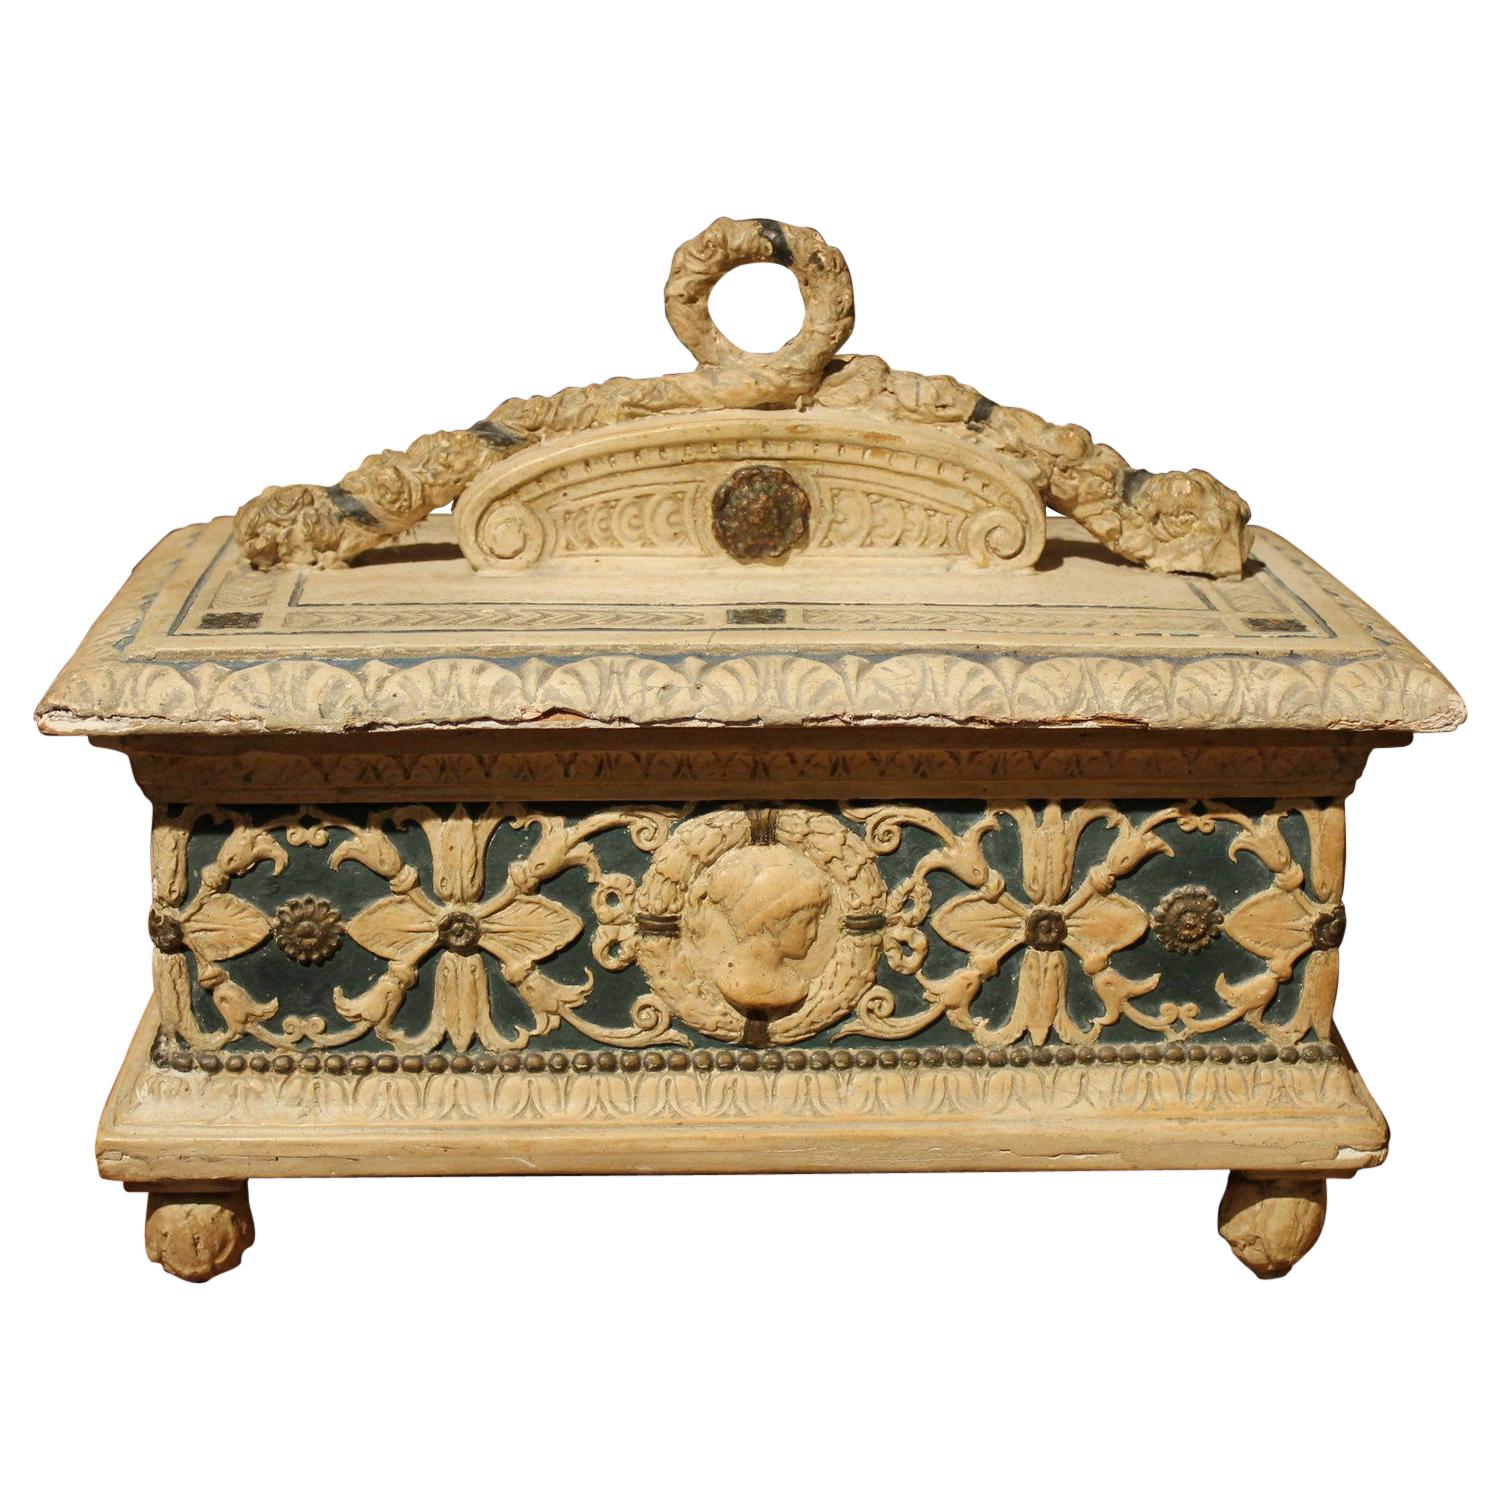 Italian 19th Century Renaissance Style Wood Lacquer and Painted Gesso Lidded Box For Sale